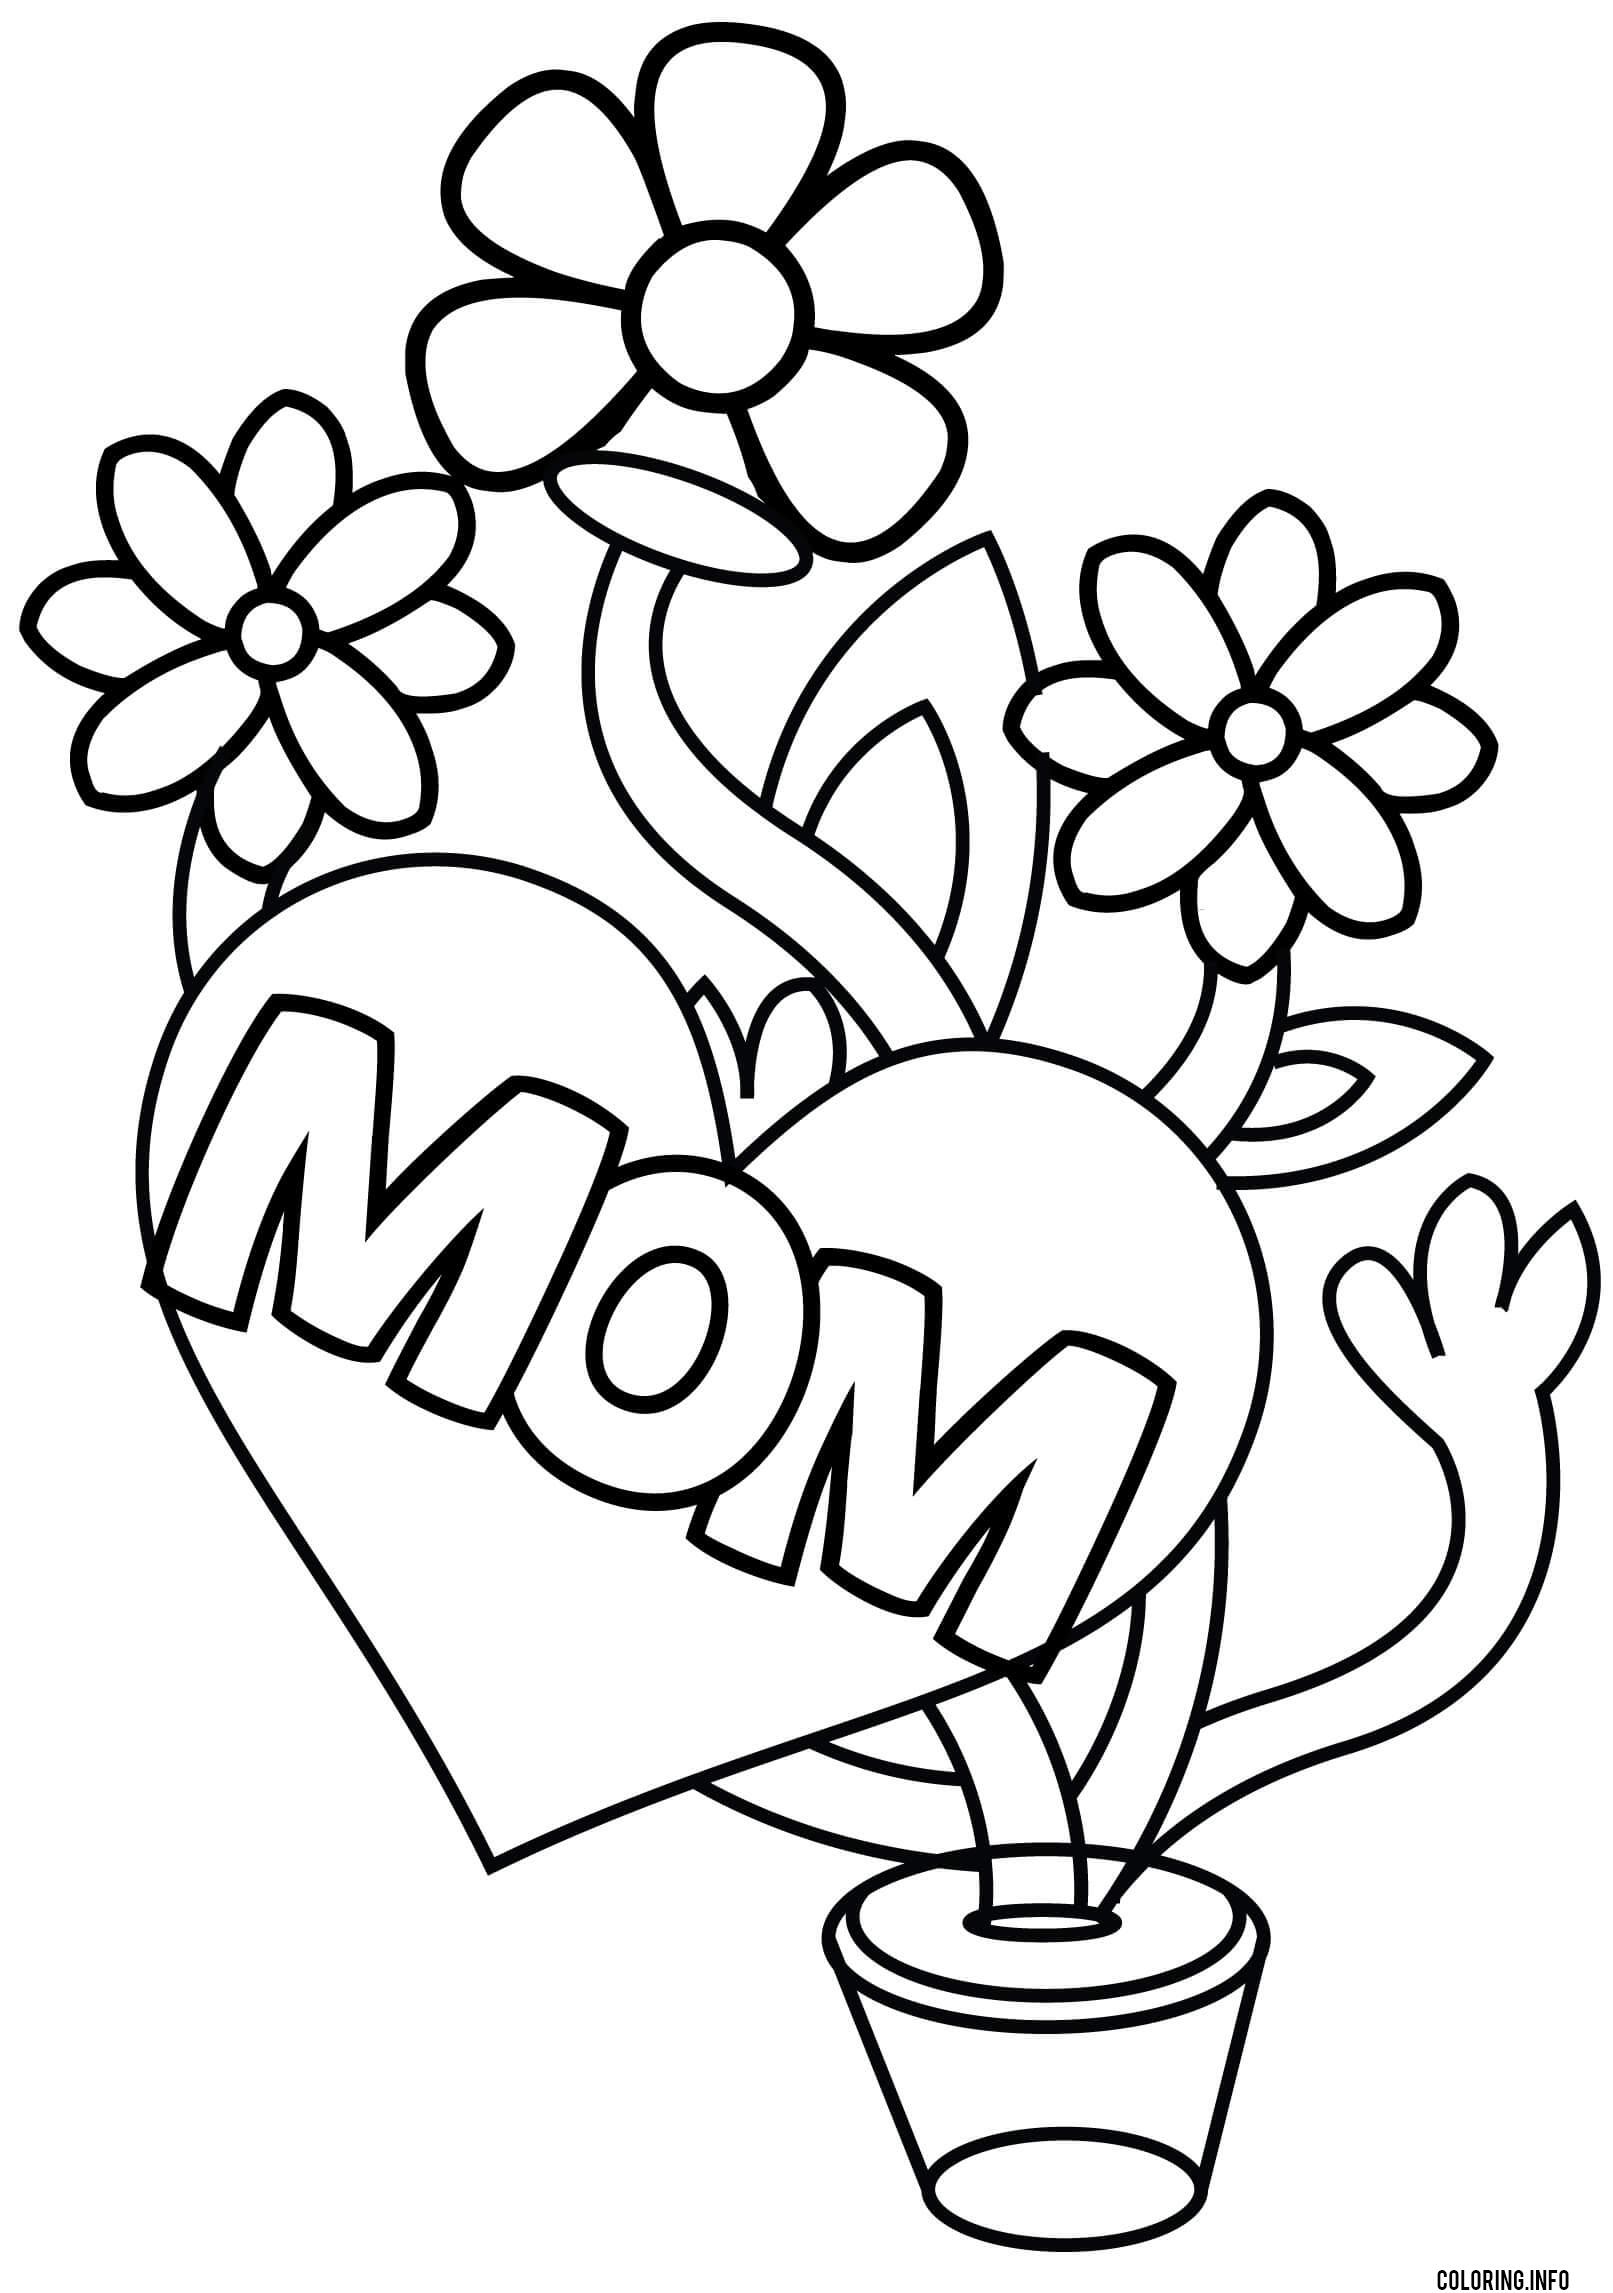 Mom Cute Flower Heart Mothers Day coloring